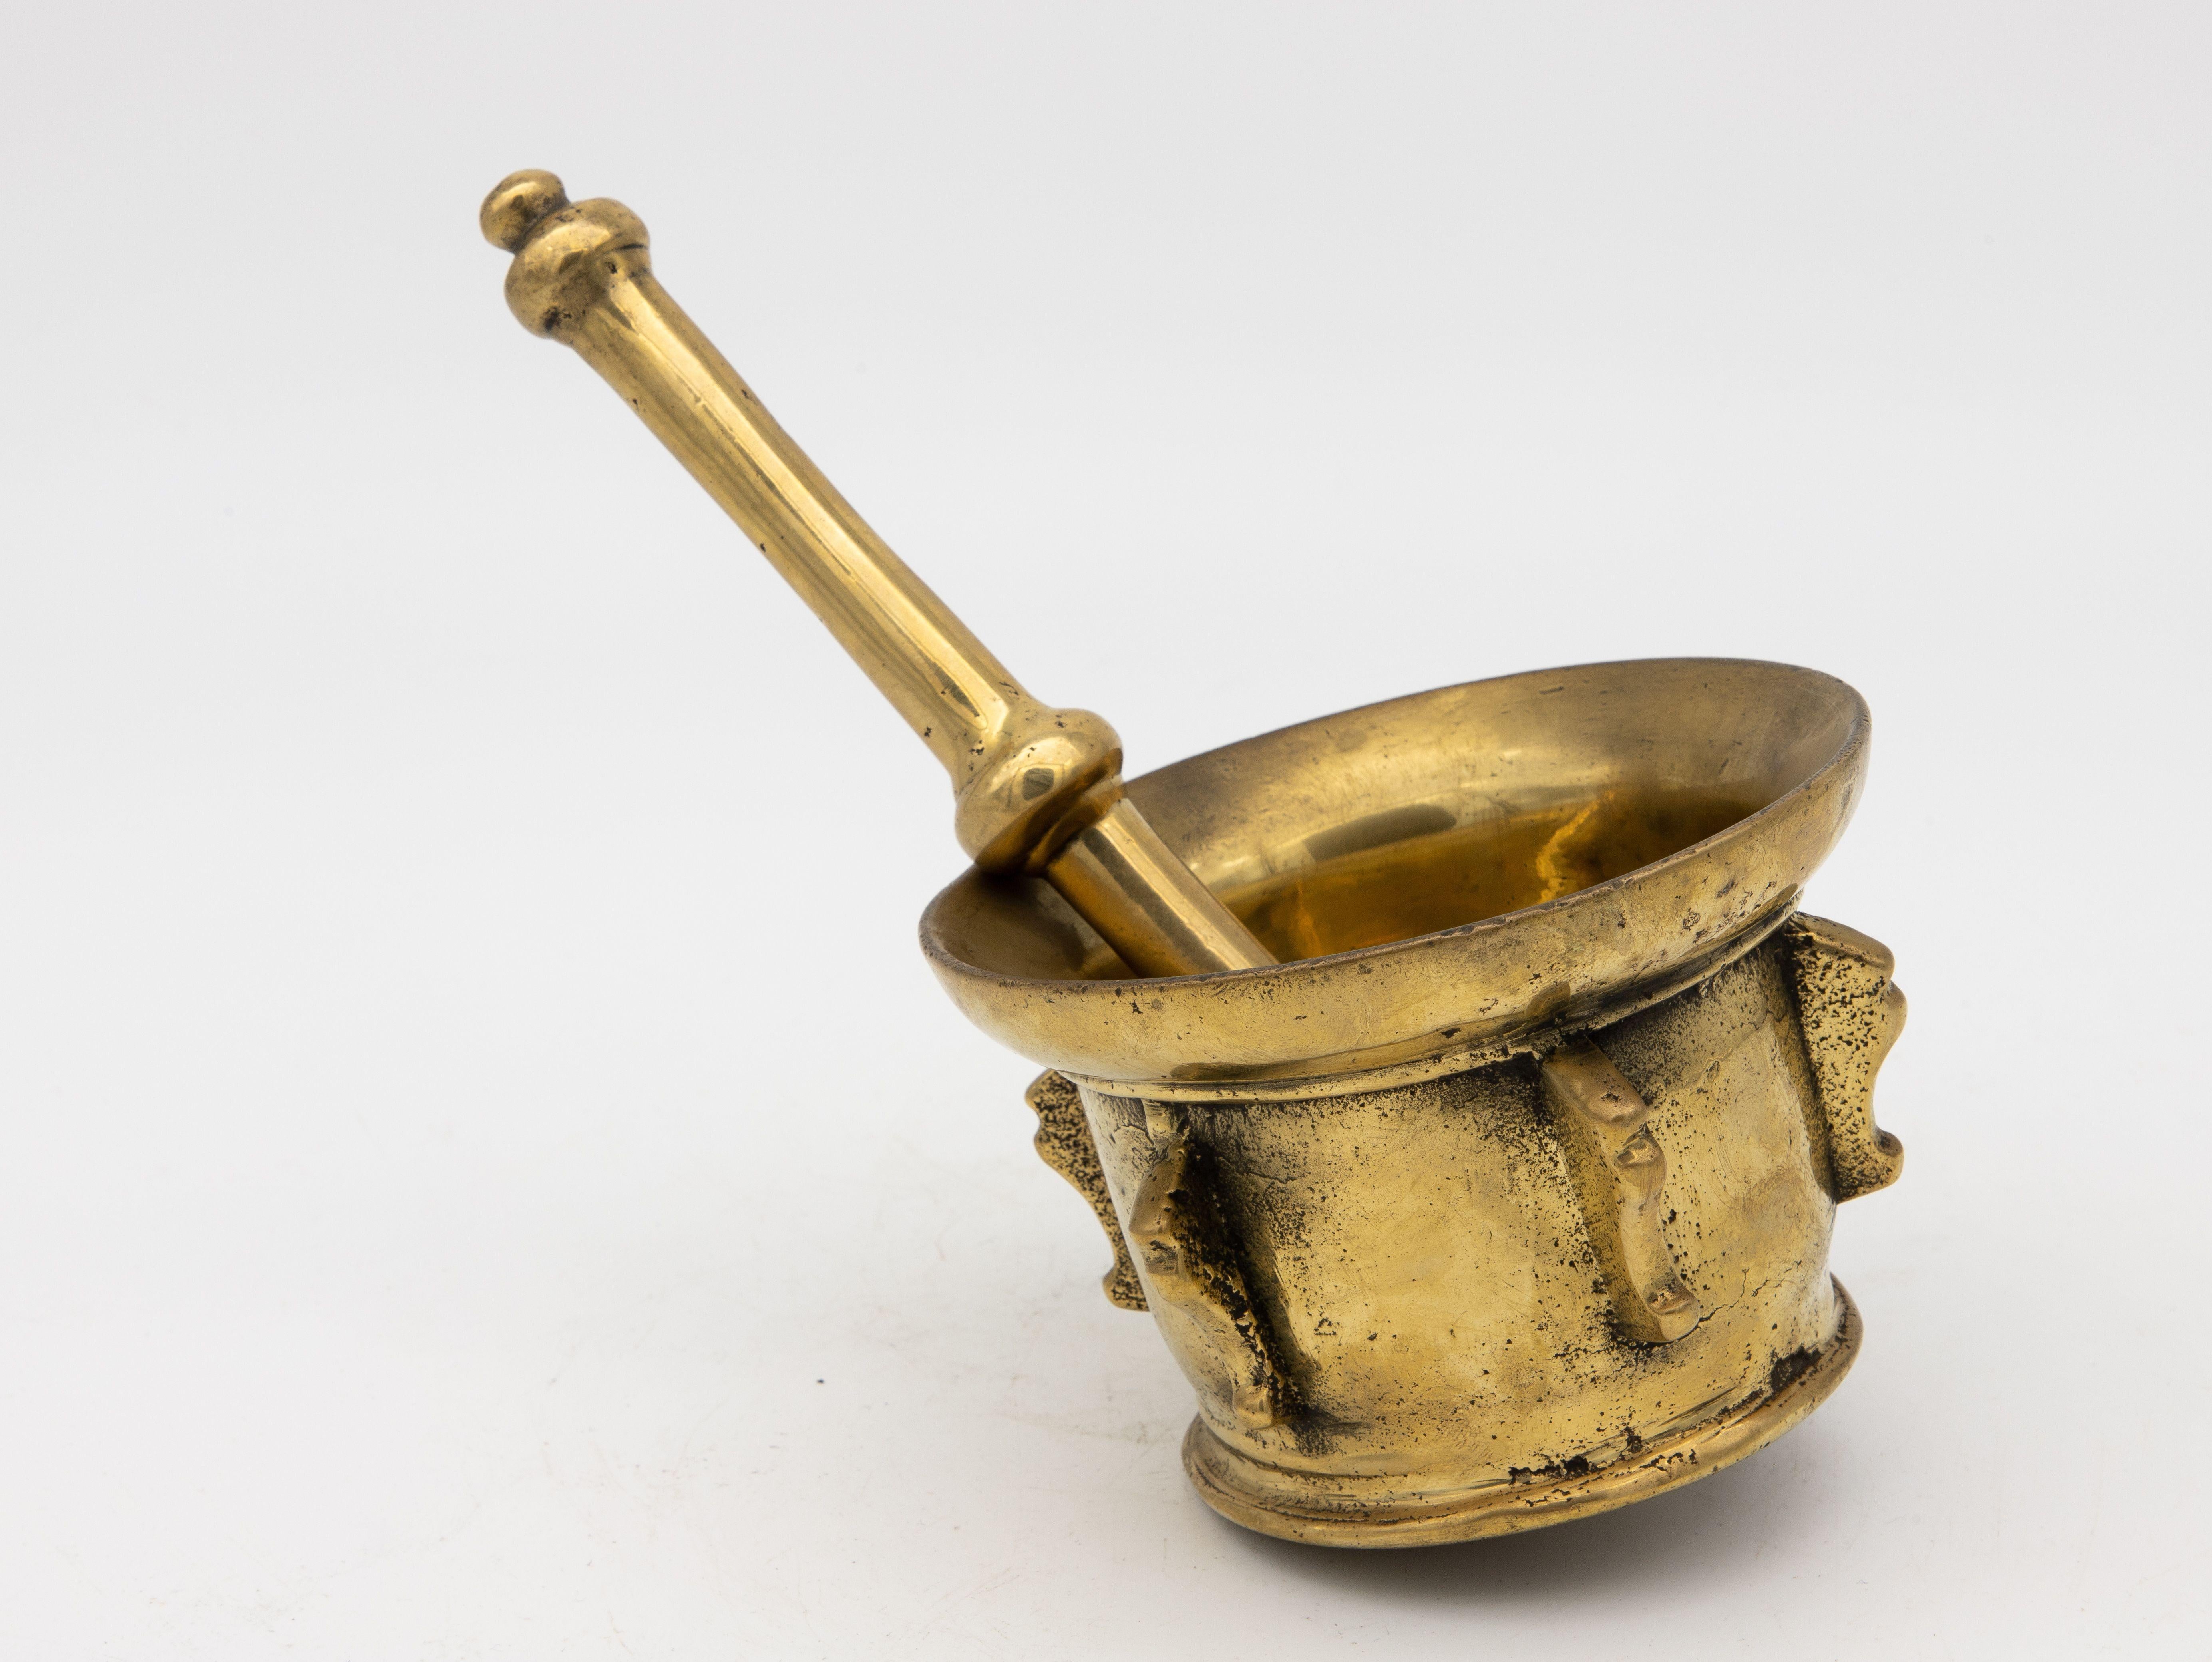 This early 20th-century mortar and pestle is made of brass with an honest patina. Both the mortar and pestle are traditional in style. The mortar has a bell-shaped body with a rounded base this style is known for, and the pestle has one round end.